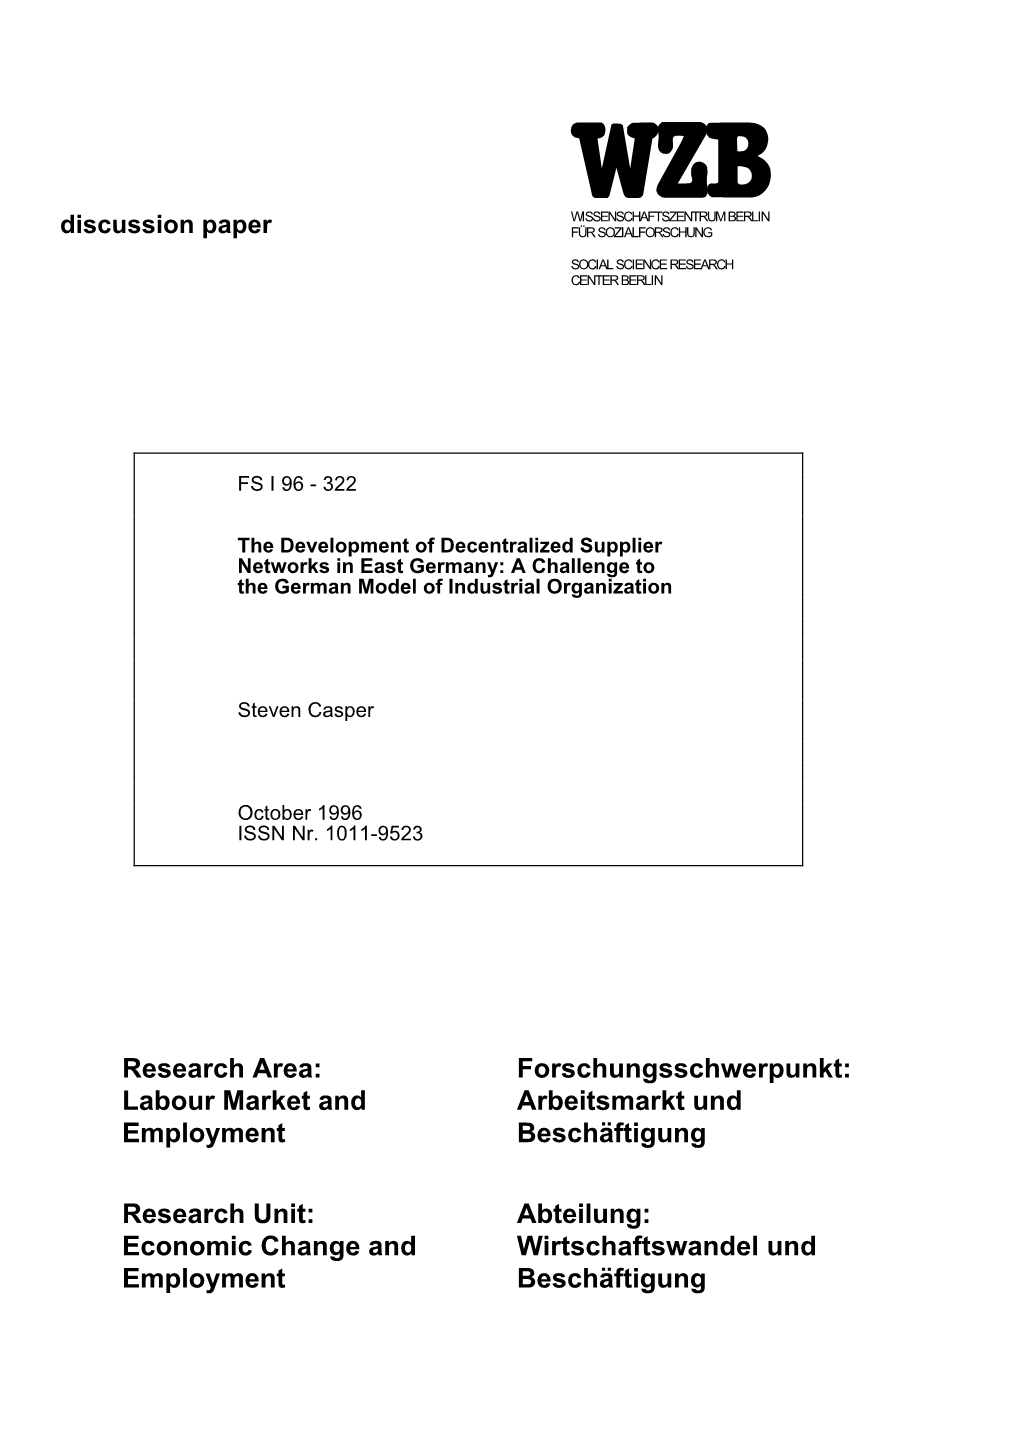 The Development of Decentralized Supplier Networks in East Germany: a Challenge to the German Model of Industrial Organization